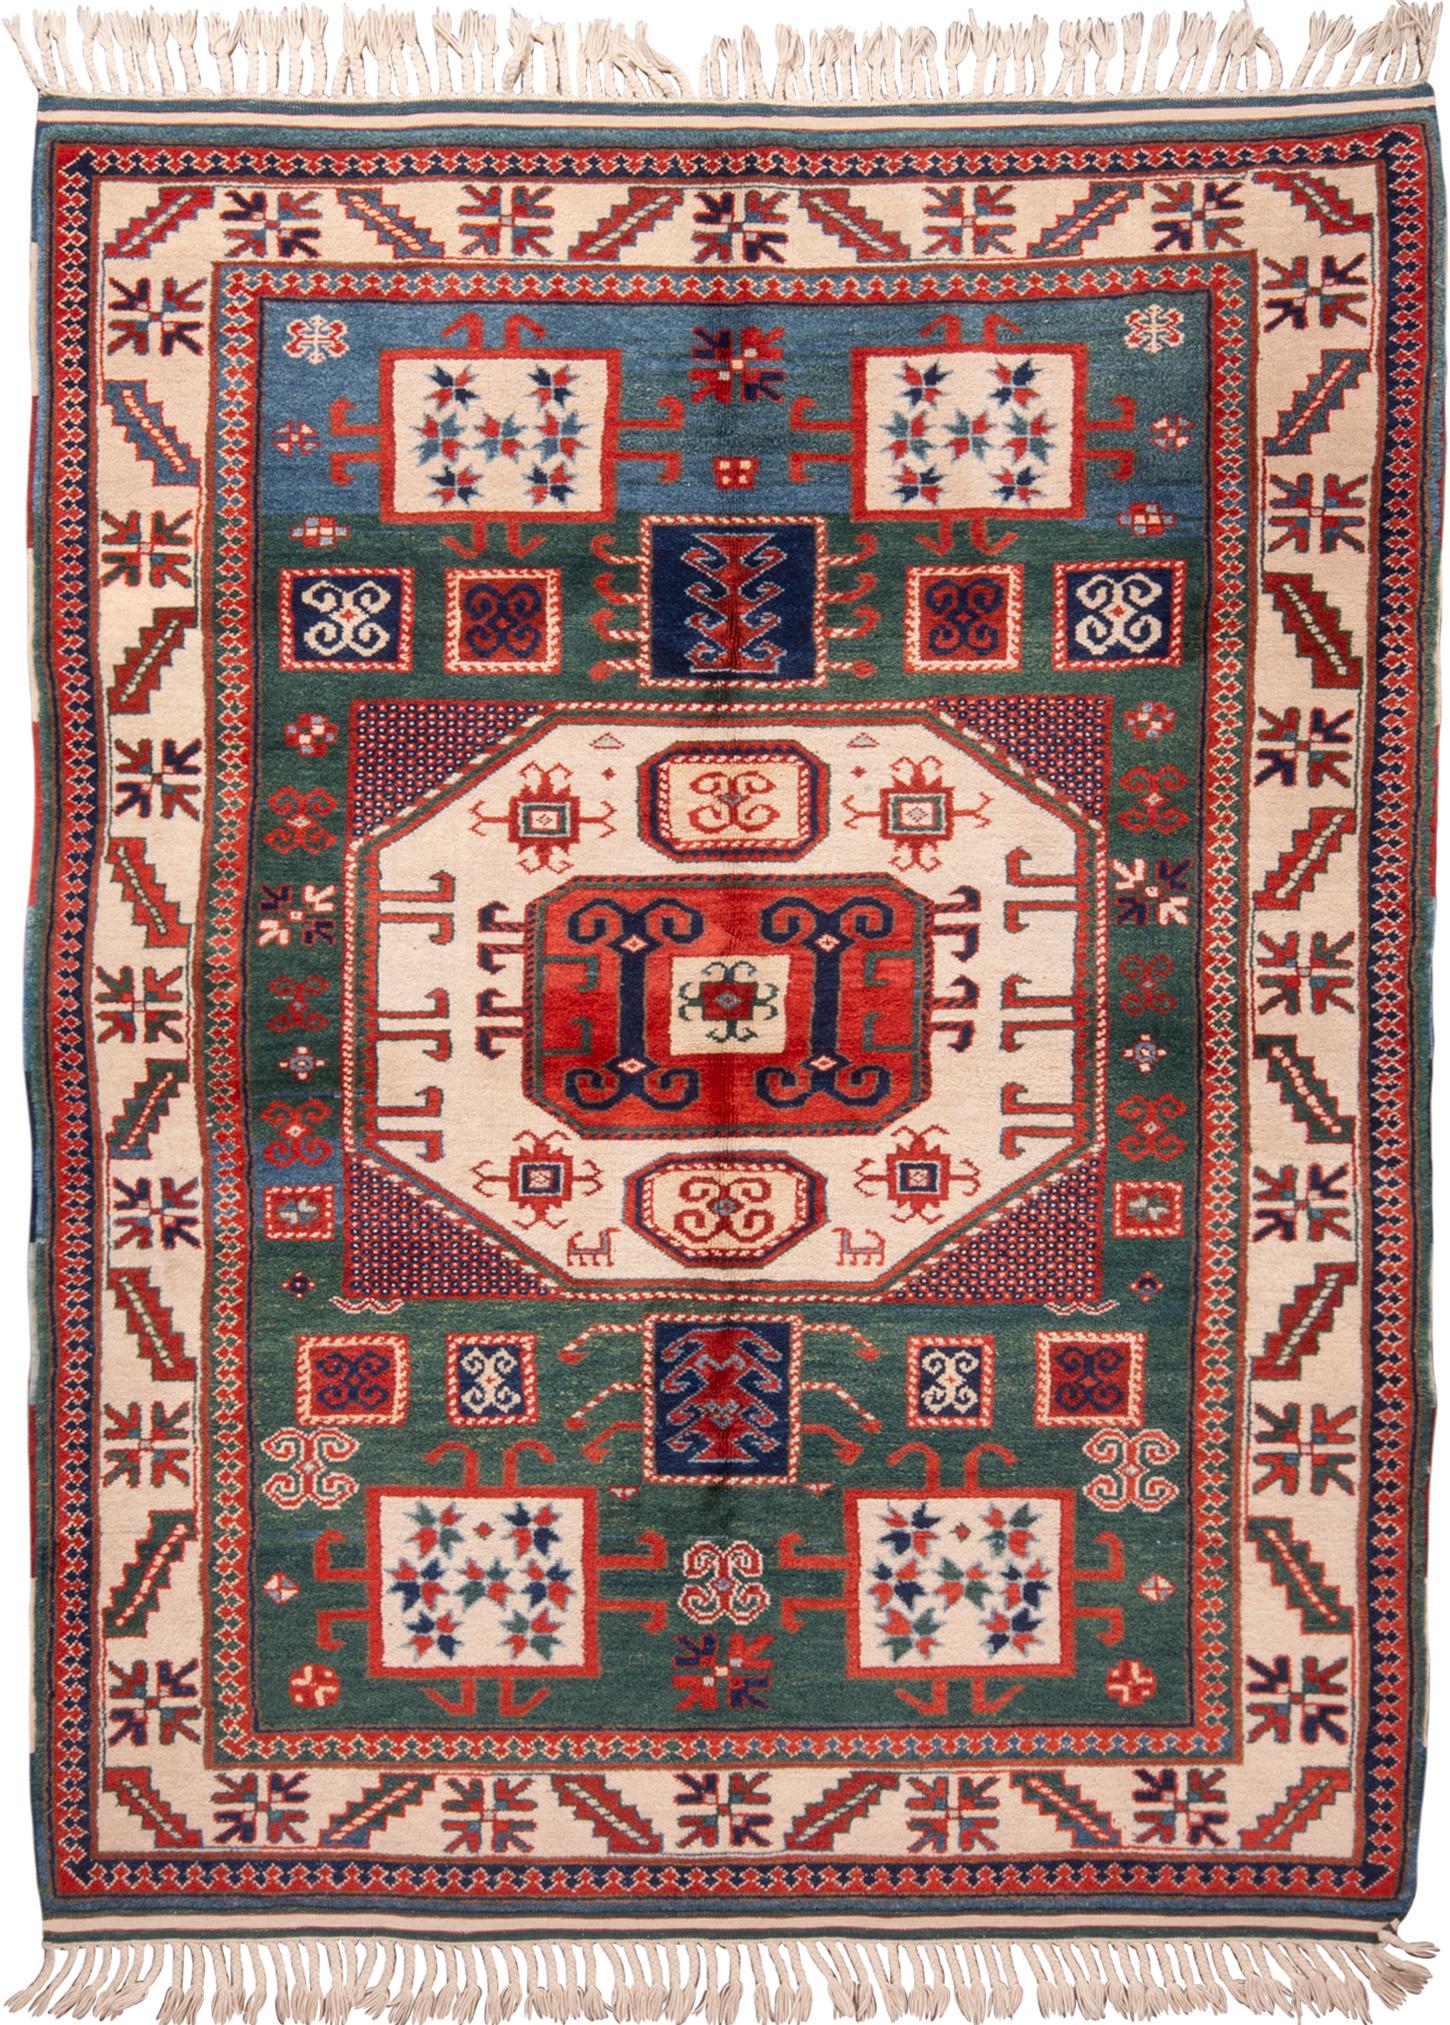 Originating from Turkey, this new Kazak transitional wool rug sports abundant Turkish ram Horn symbols throughout the field design. As traditional symbols of strength and resilience, it is uncommon to see more than a few, let alone more than a dozen